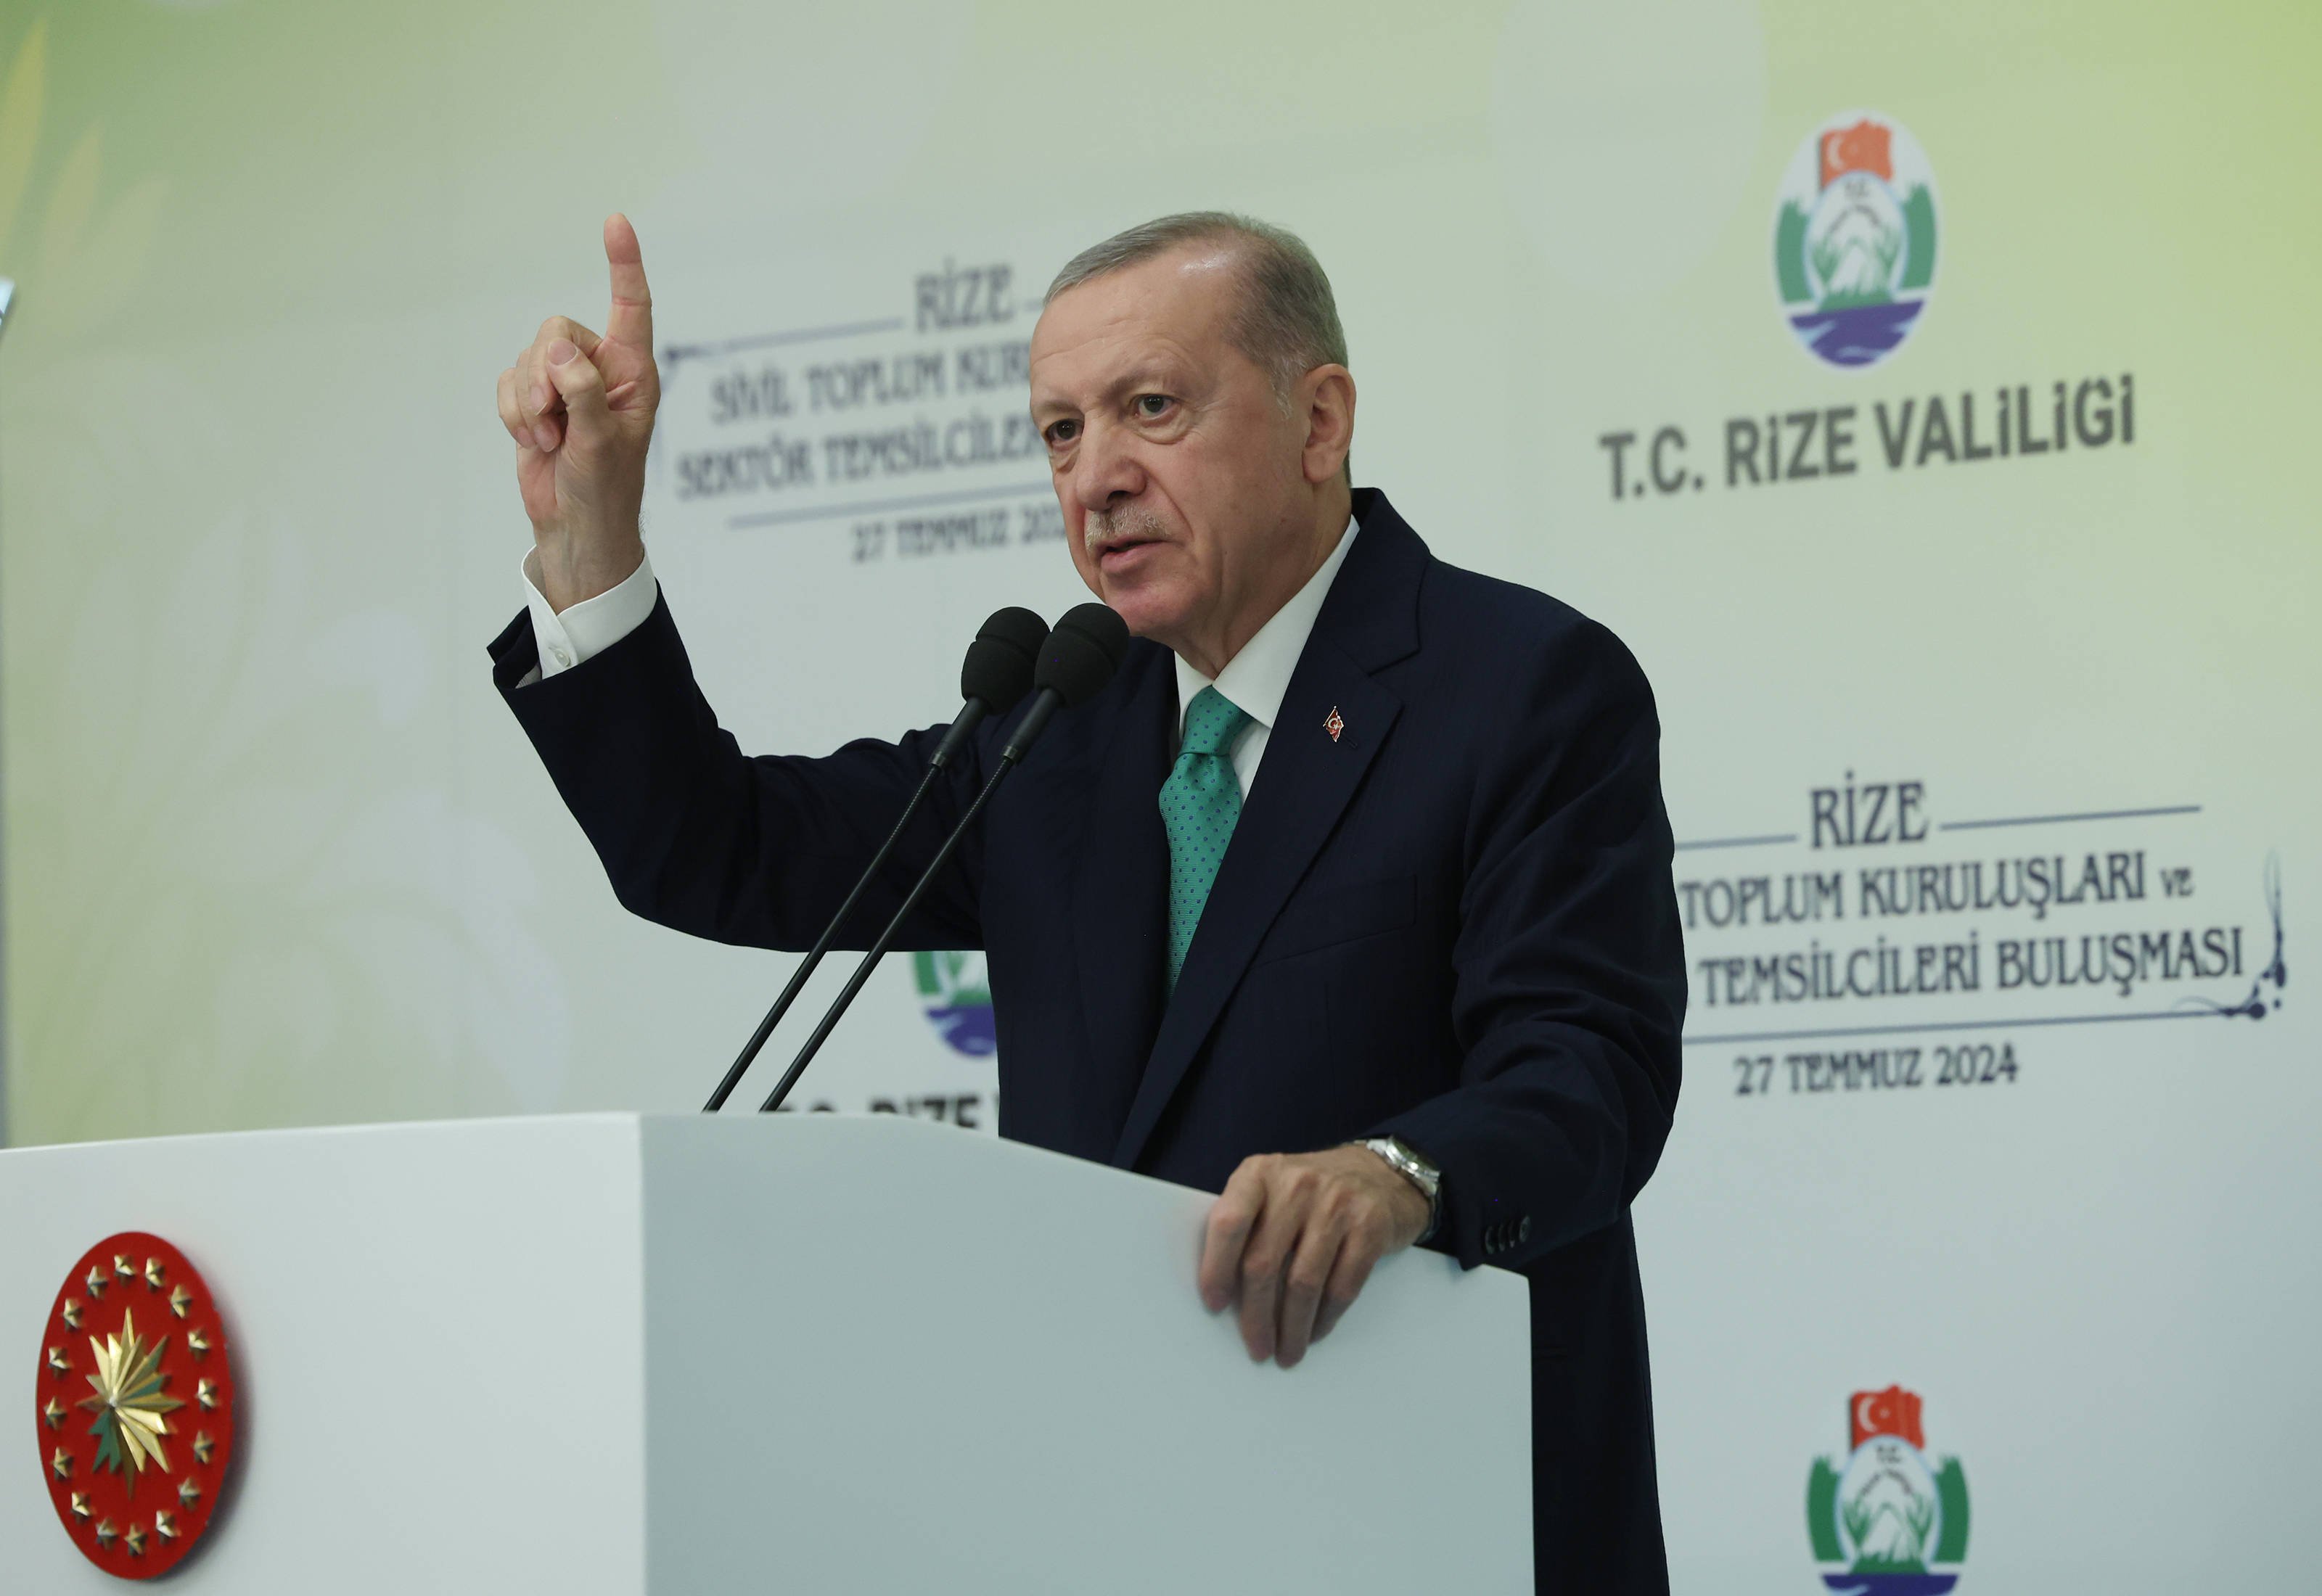 Erdoğan says Turkey could use military force against Israel ‘just as we did in Libya and Karabakh’